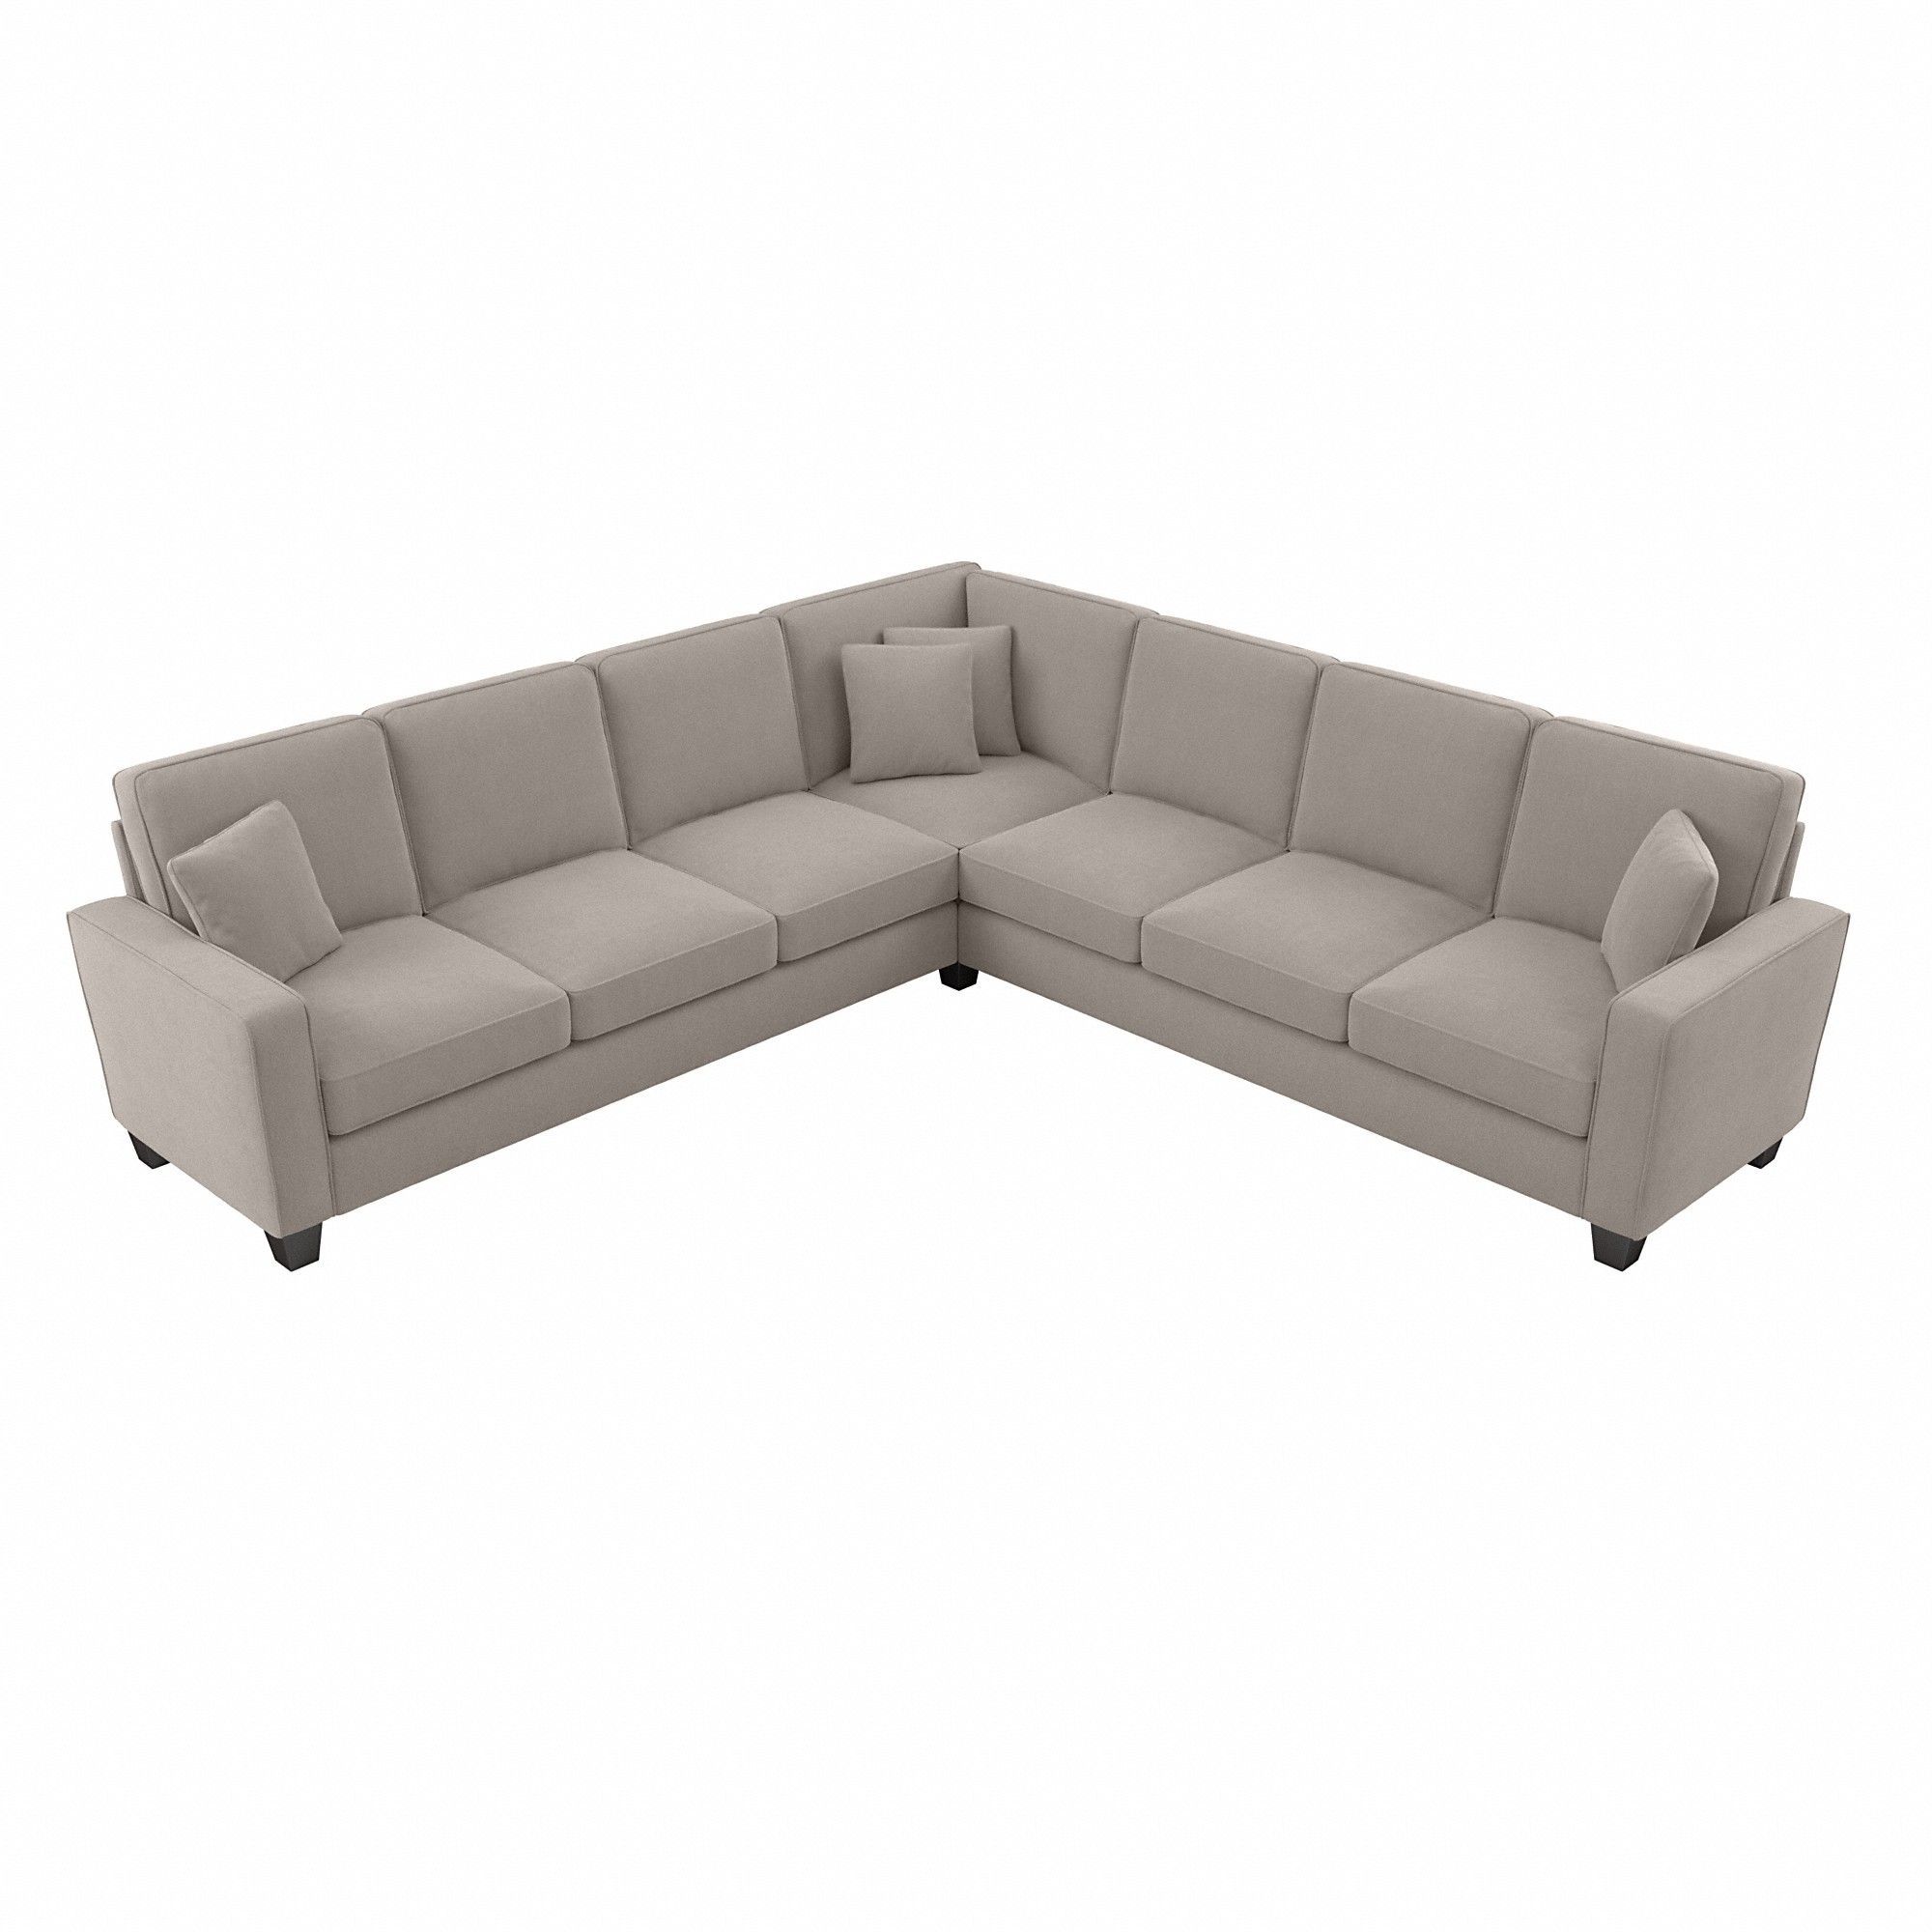 Furniture Stockton 110w L Shaped Sectional Couch In Beige Herringbone Intended For Beige L Shaped Sectional Sofas (Gallery 7 of 20)